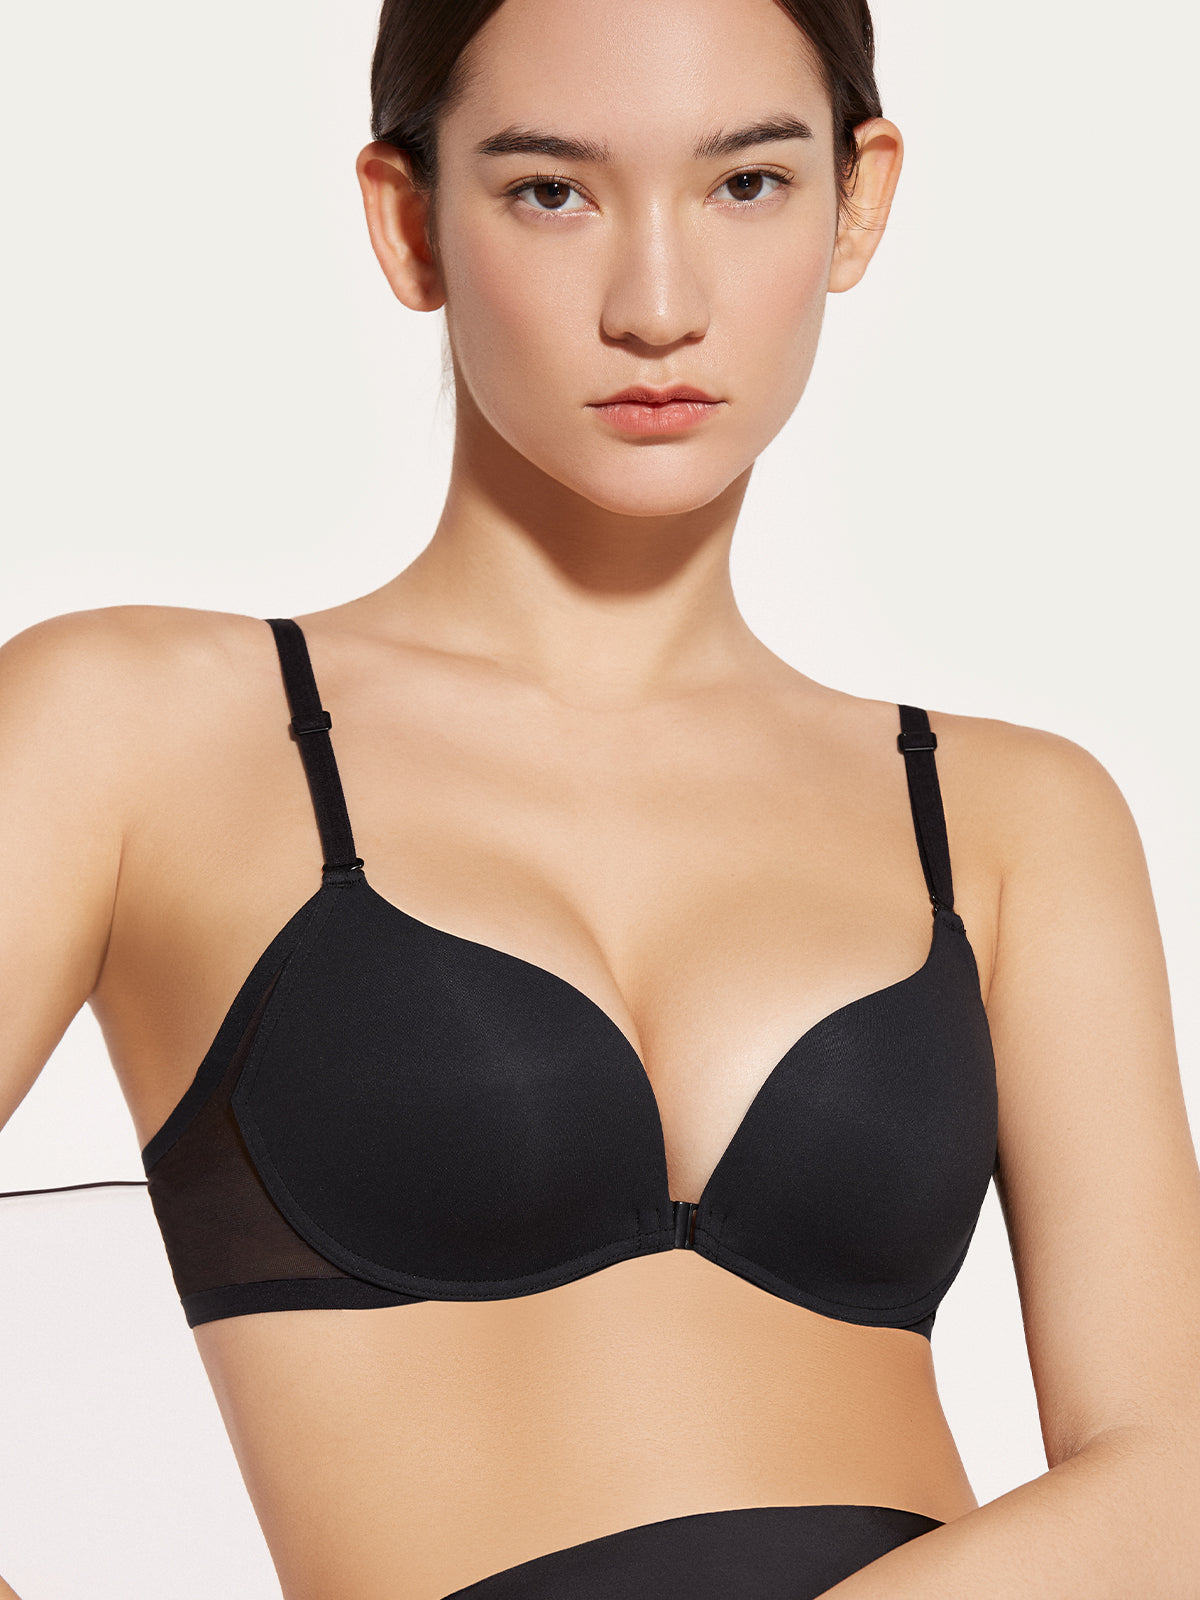 Up To 68% Off Lace-Up Front Push-Up Bra